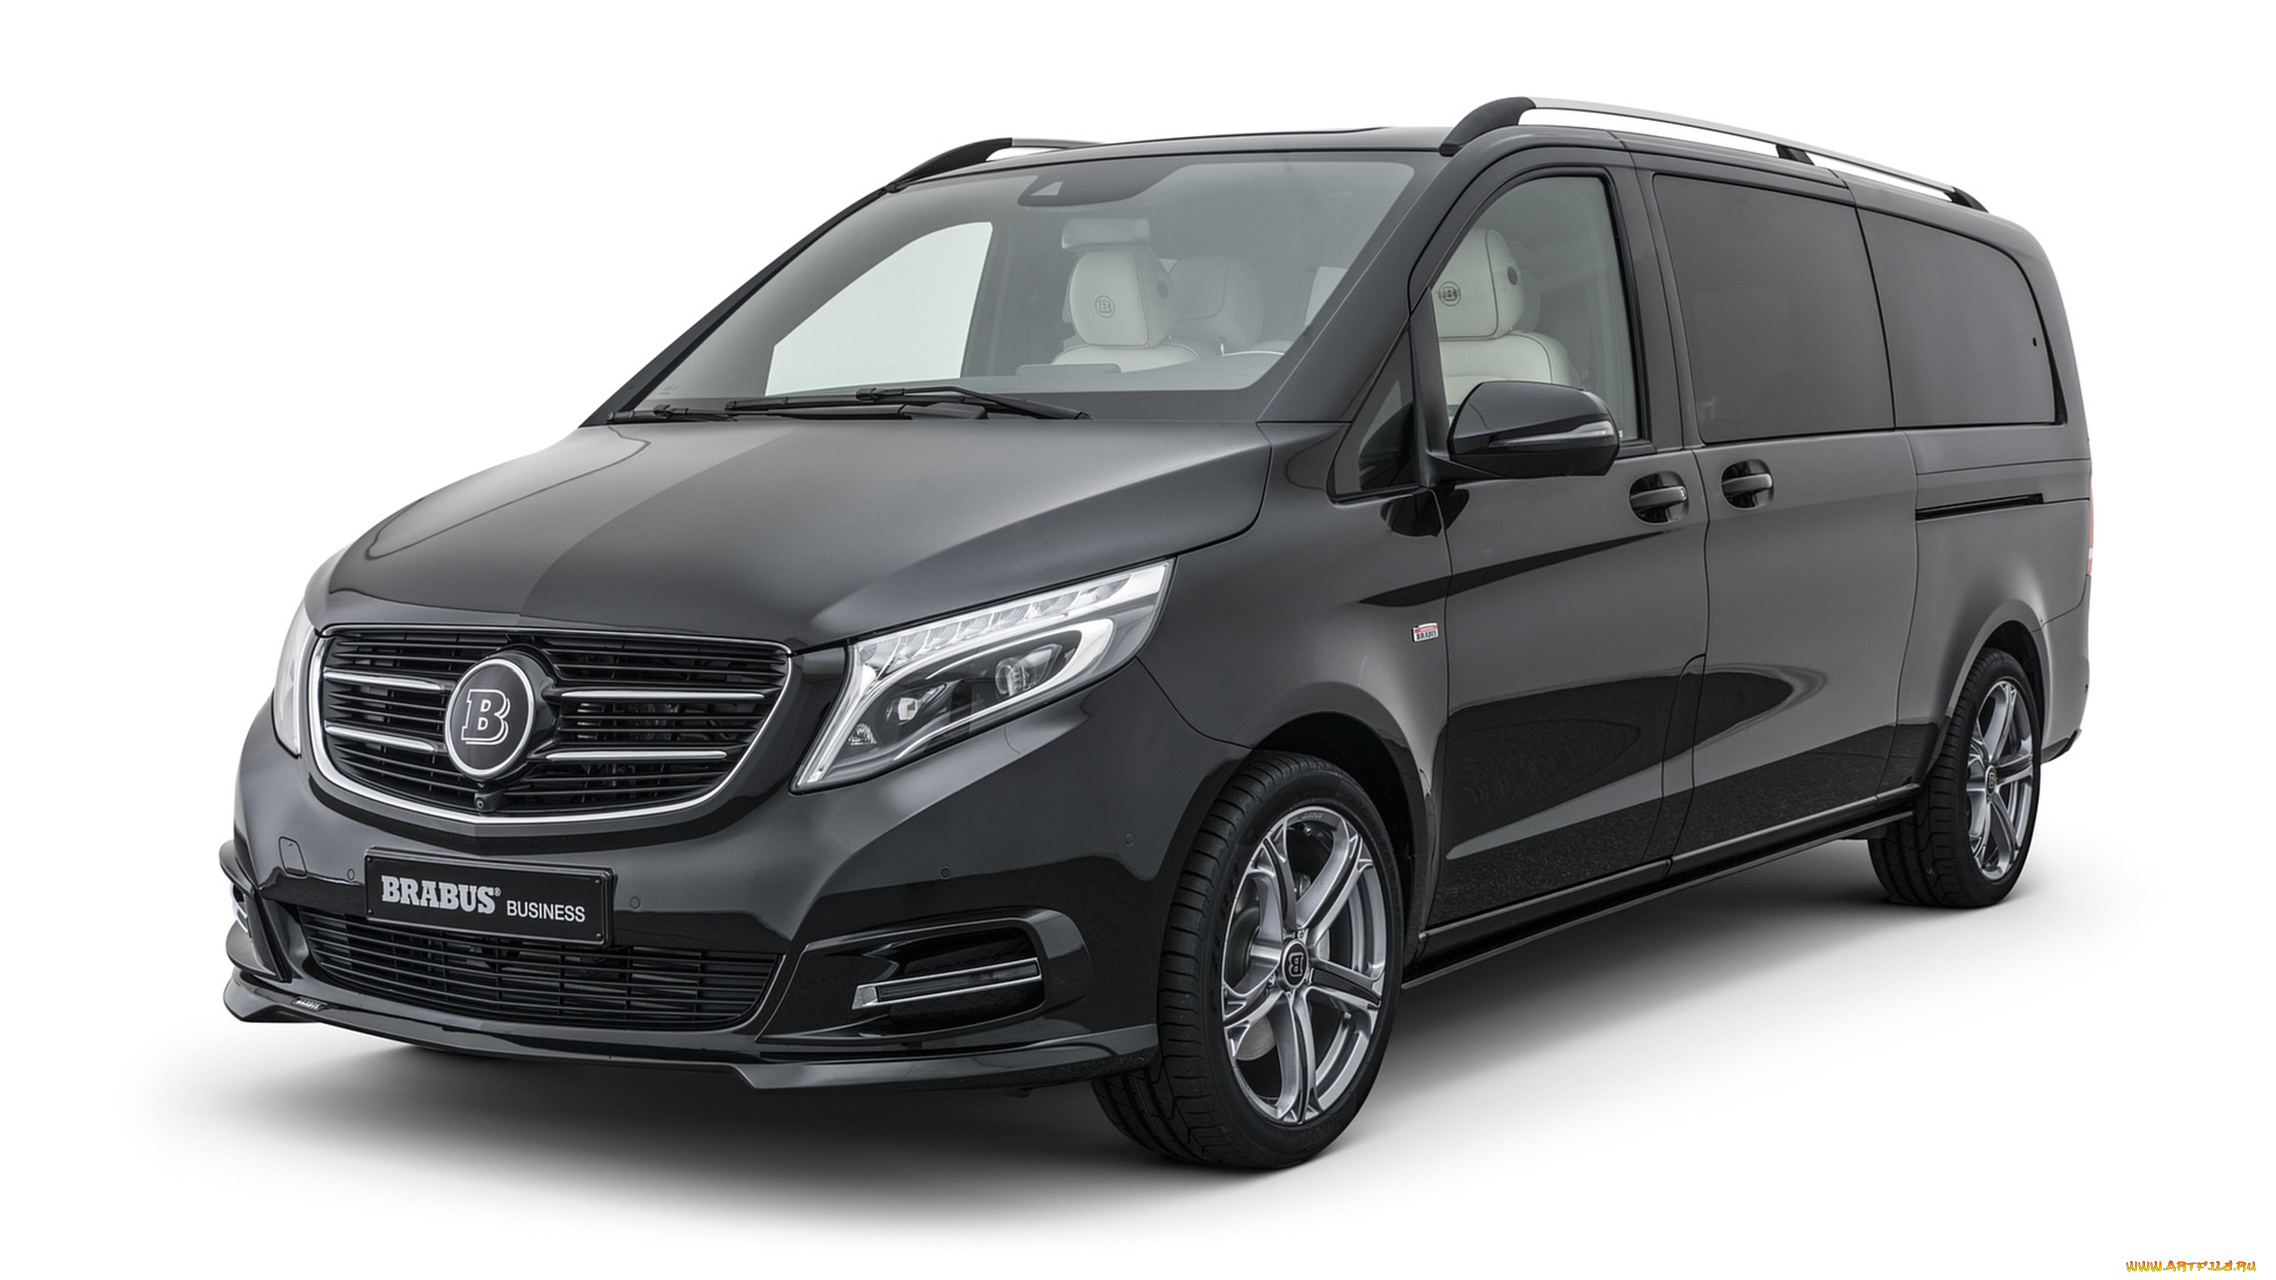 brabus, business, plus, based, on, mercedes-benz, v-class, 2018, автомобили, brabus, 2018, v-class, mercedes-benz, plus, based, business